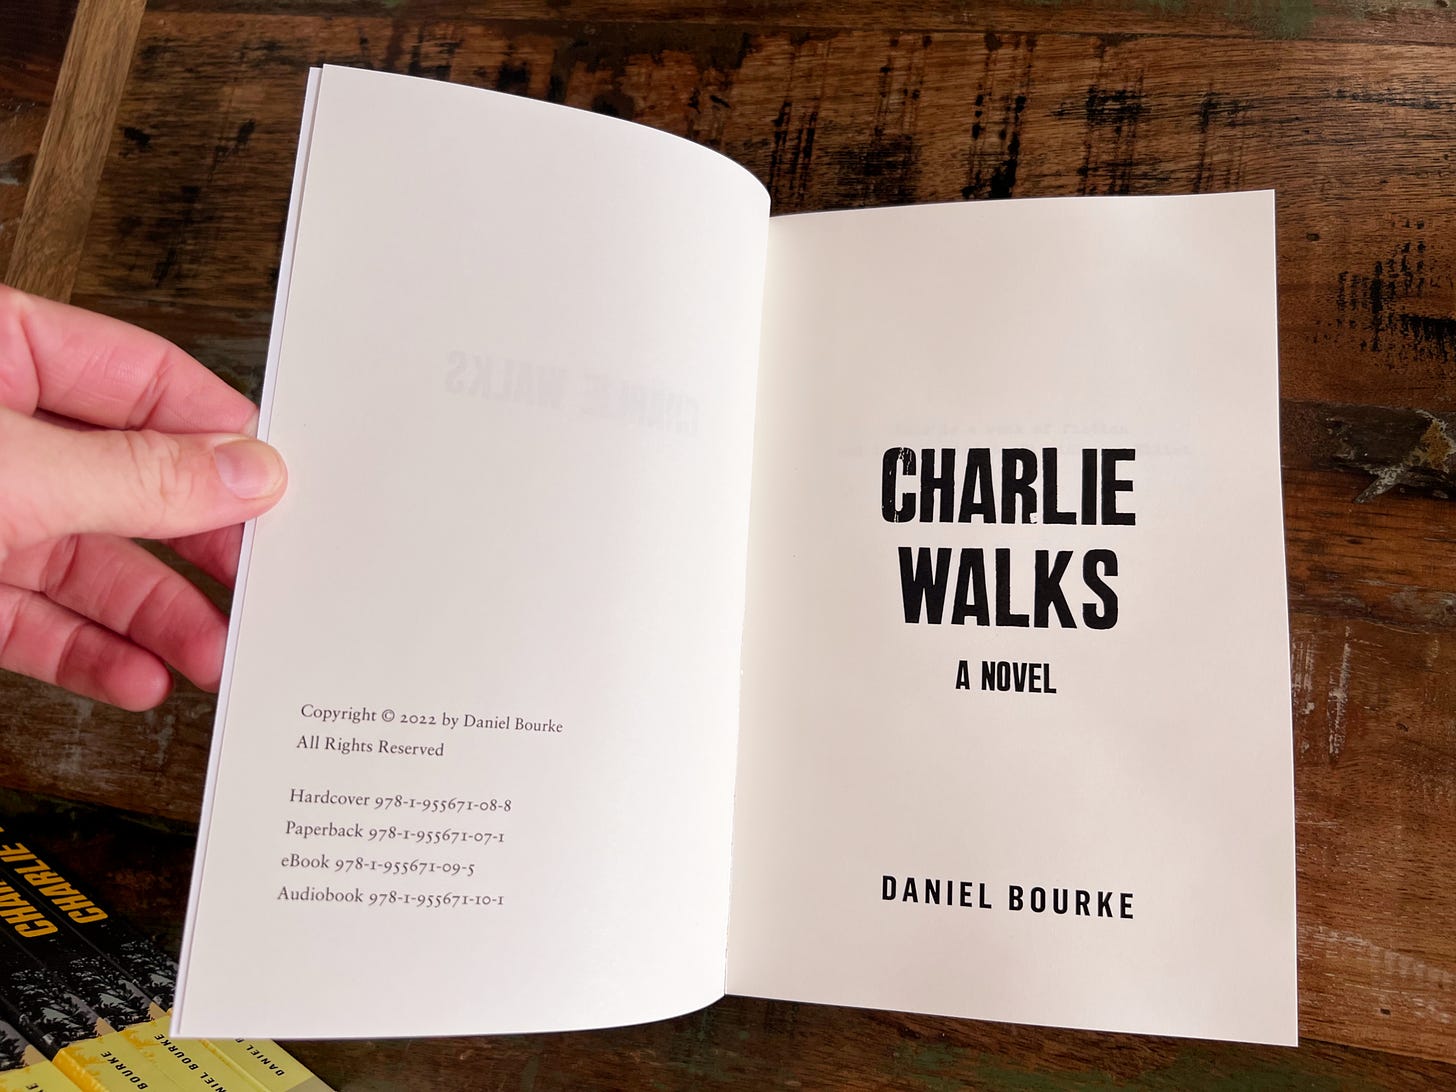 inside the front cover of a novel with the title Charlie Walks by Daniel Bourke